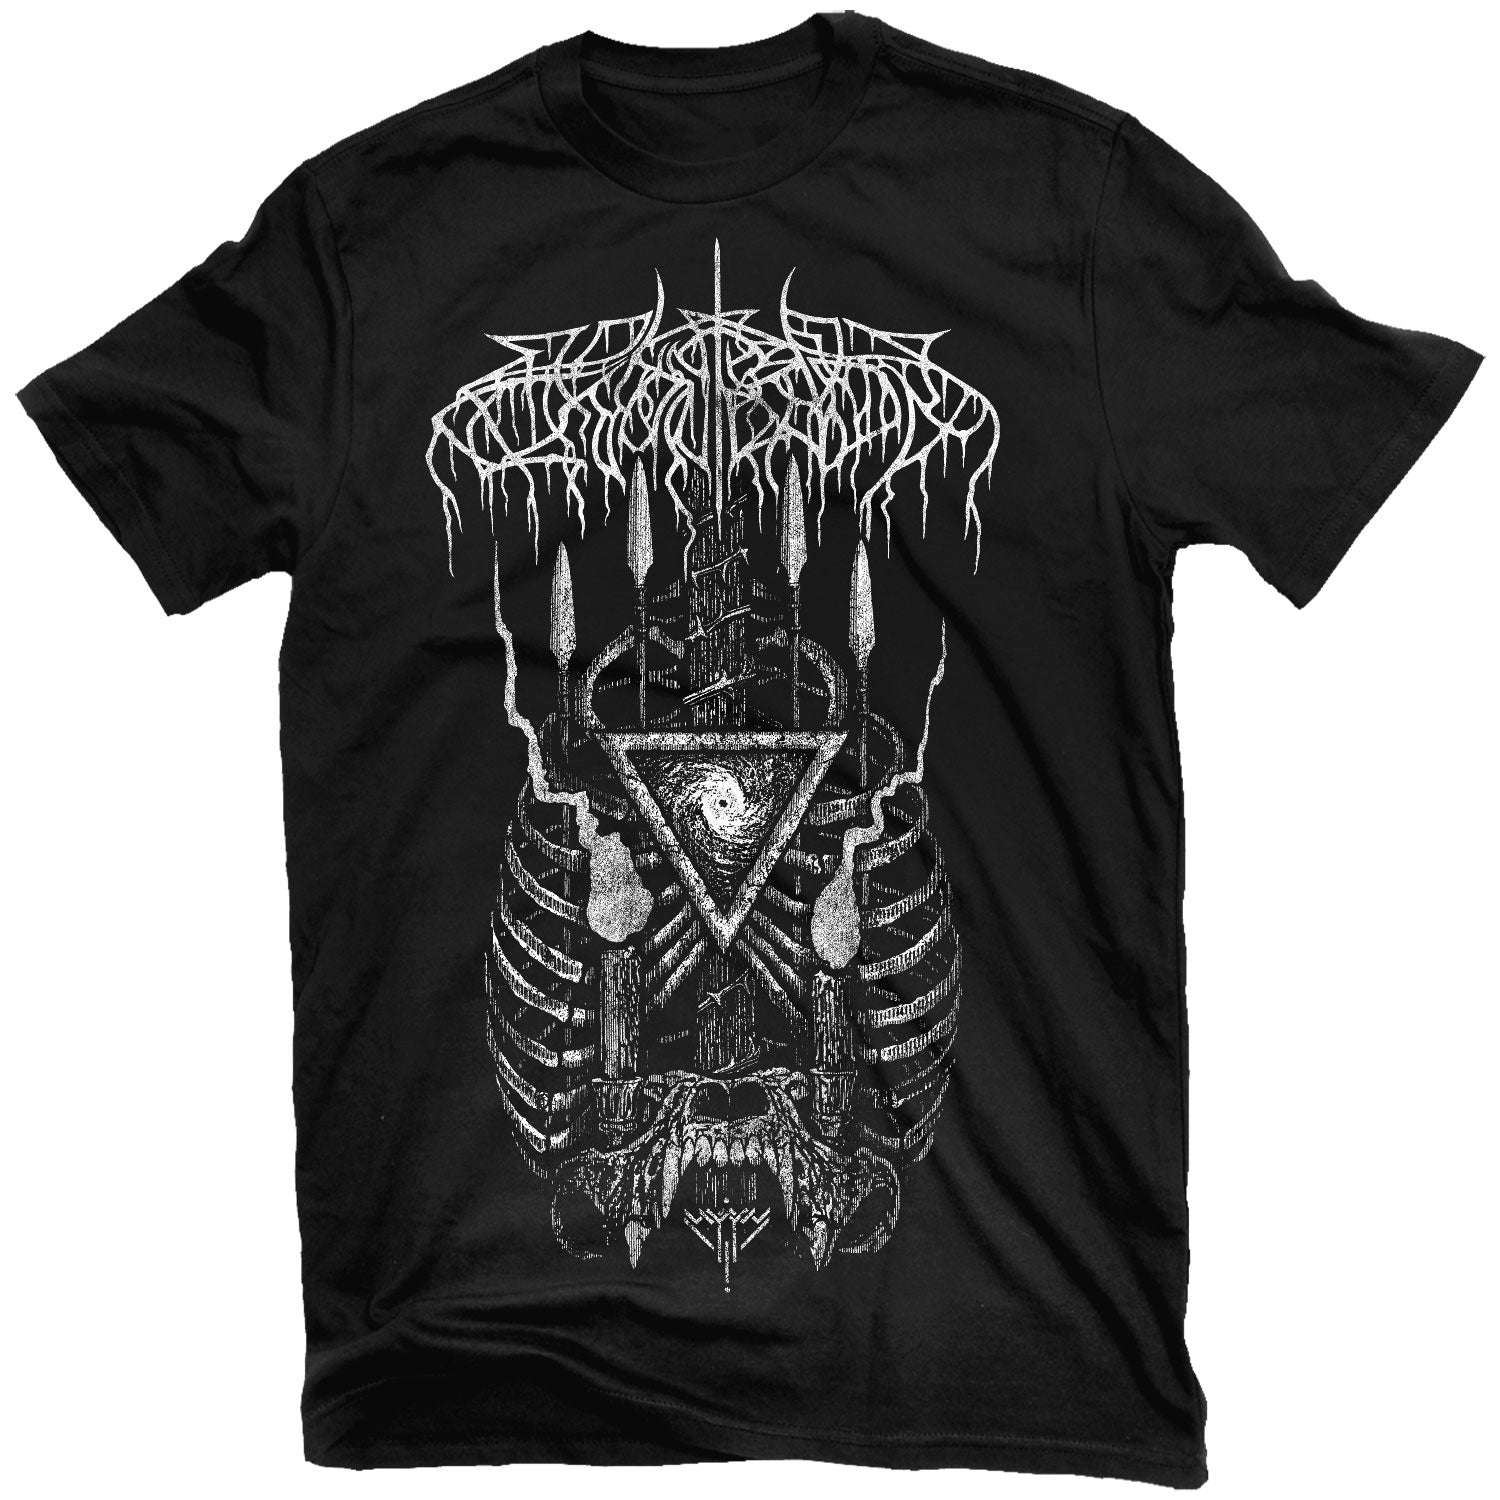 Wolves In The Throne Room "Primal Chasm" T-Shirt